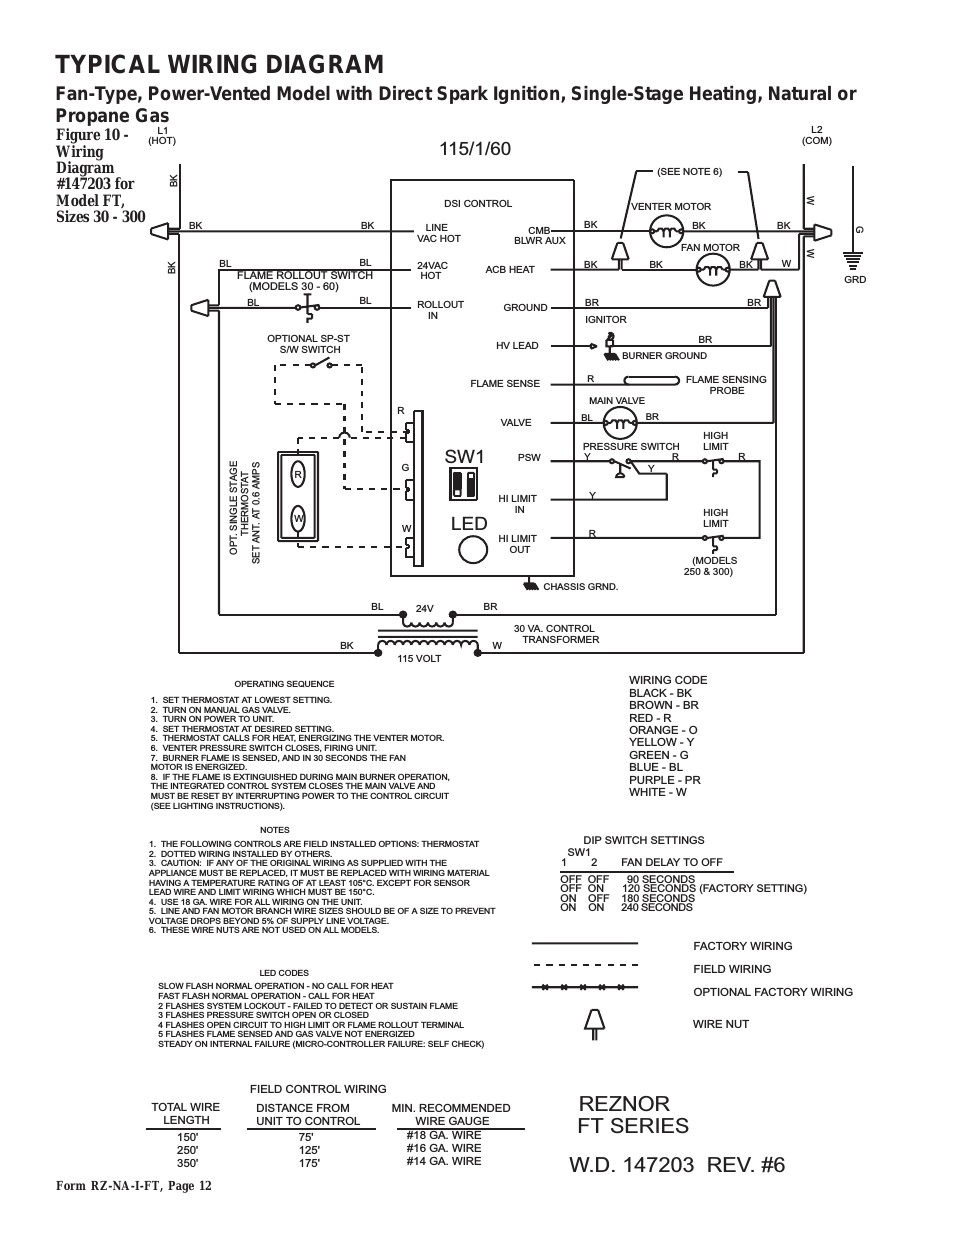 reznor heater wiring diagram Collection Modine Heater Wiring Diagram Carrier Free Within And 1 DOWNLOAD Wiring Diagram Sheets Detail Name reznor heater